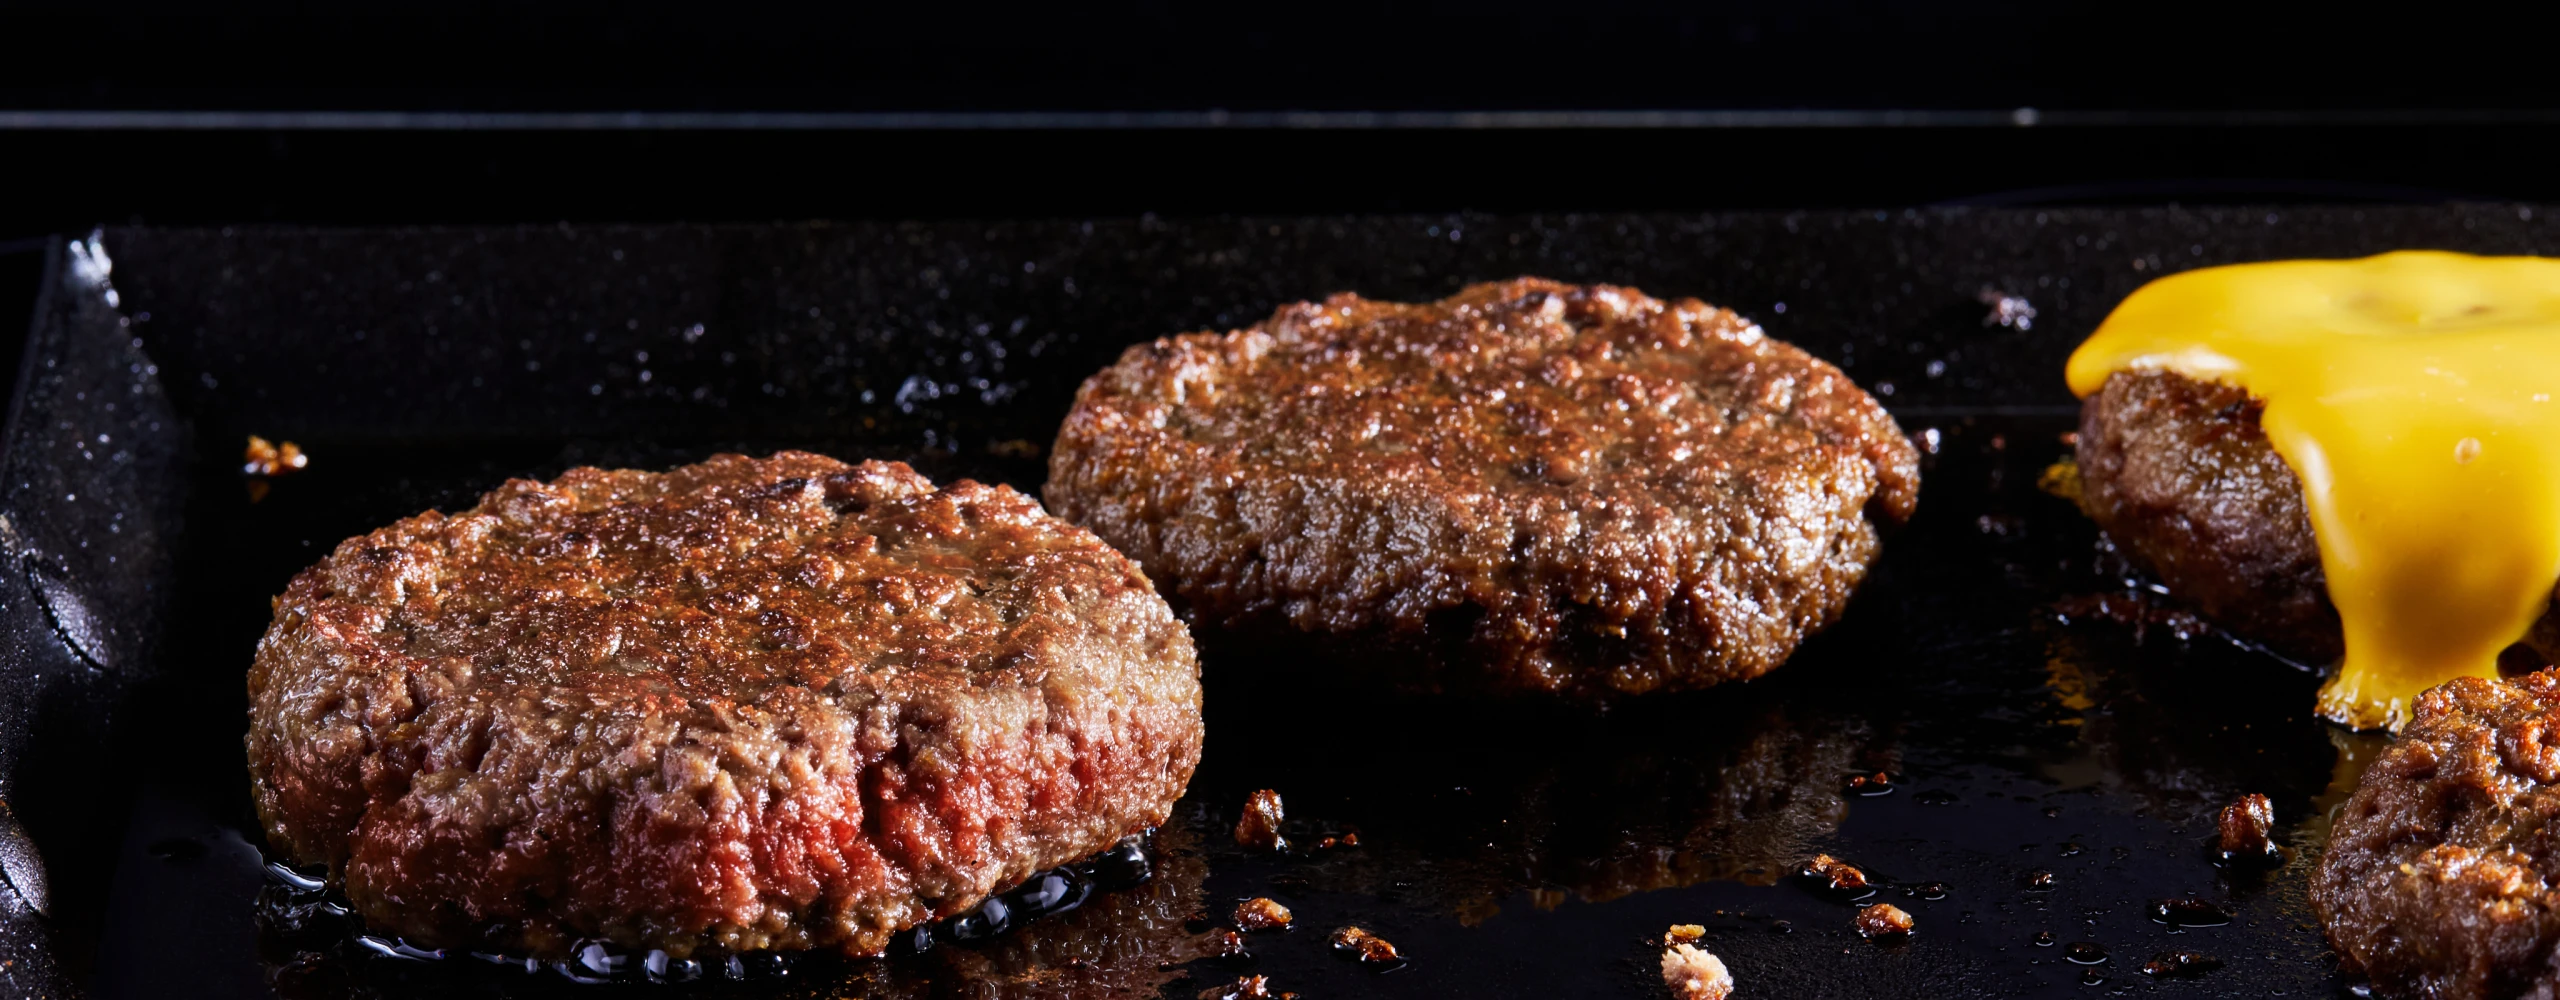 How to cook the new Impossible Burger thumbnail image, Impossible burger patties sizzling on a grill top